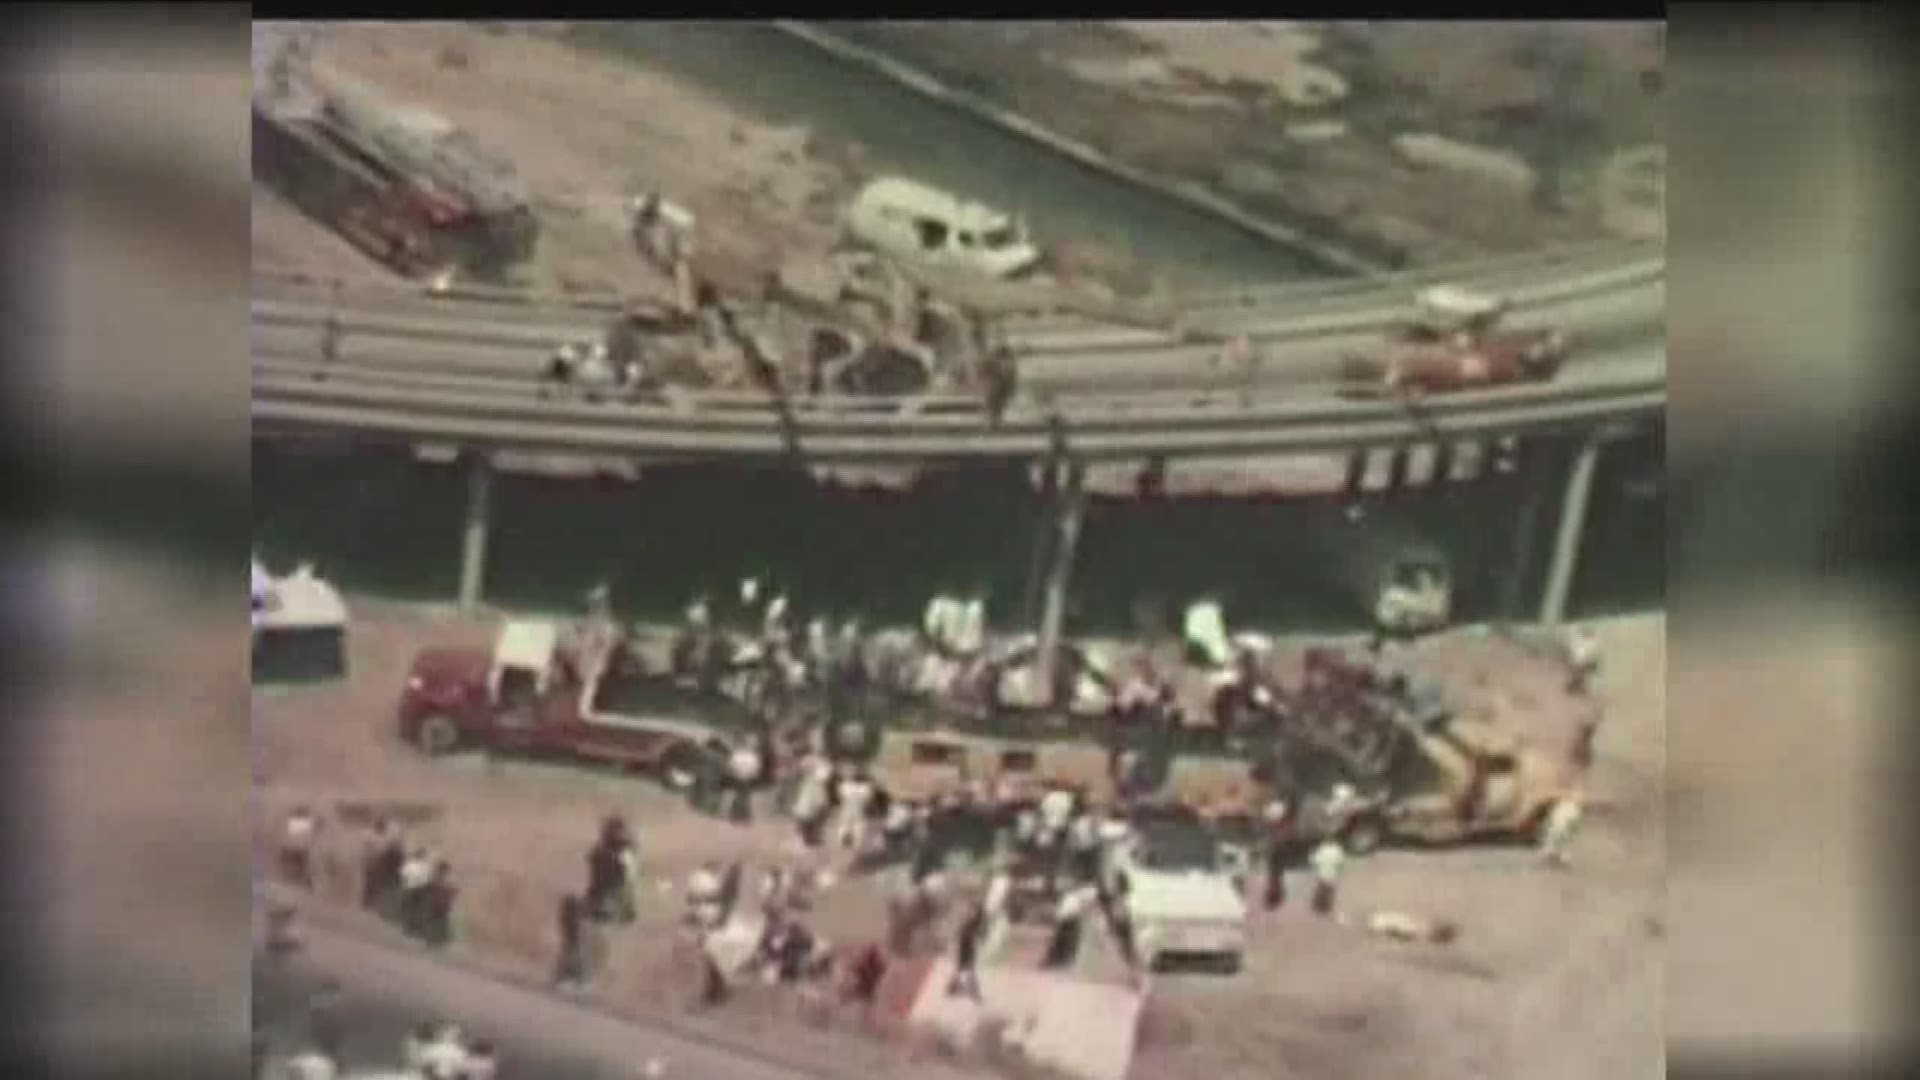 May 21, 1976, marks the date of the nation's deadliest bus accident.